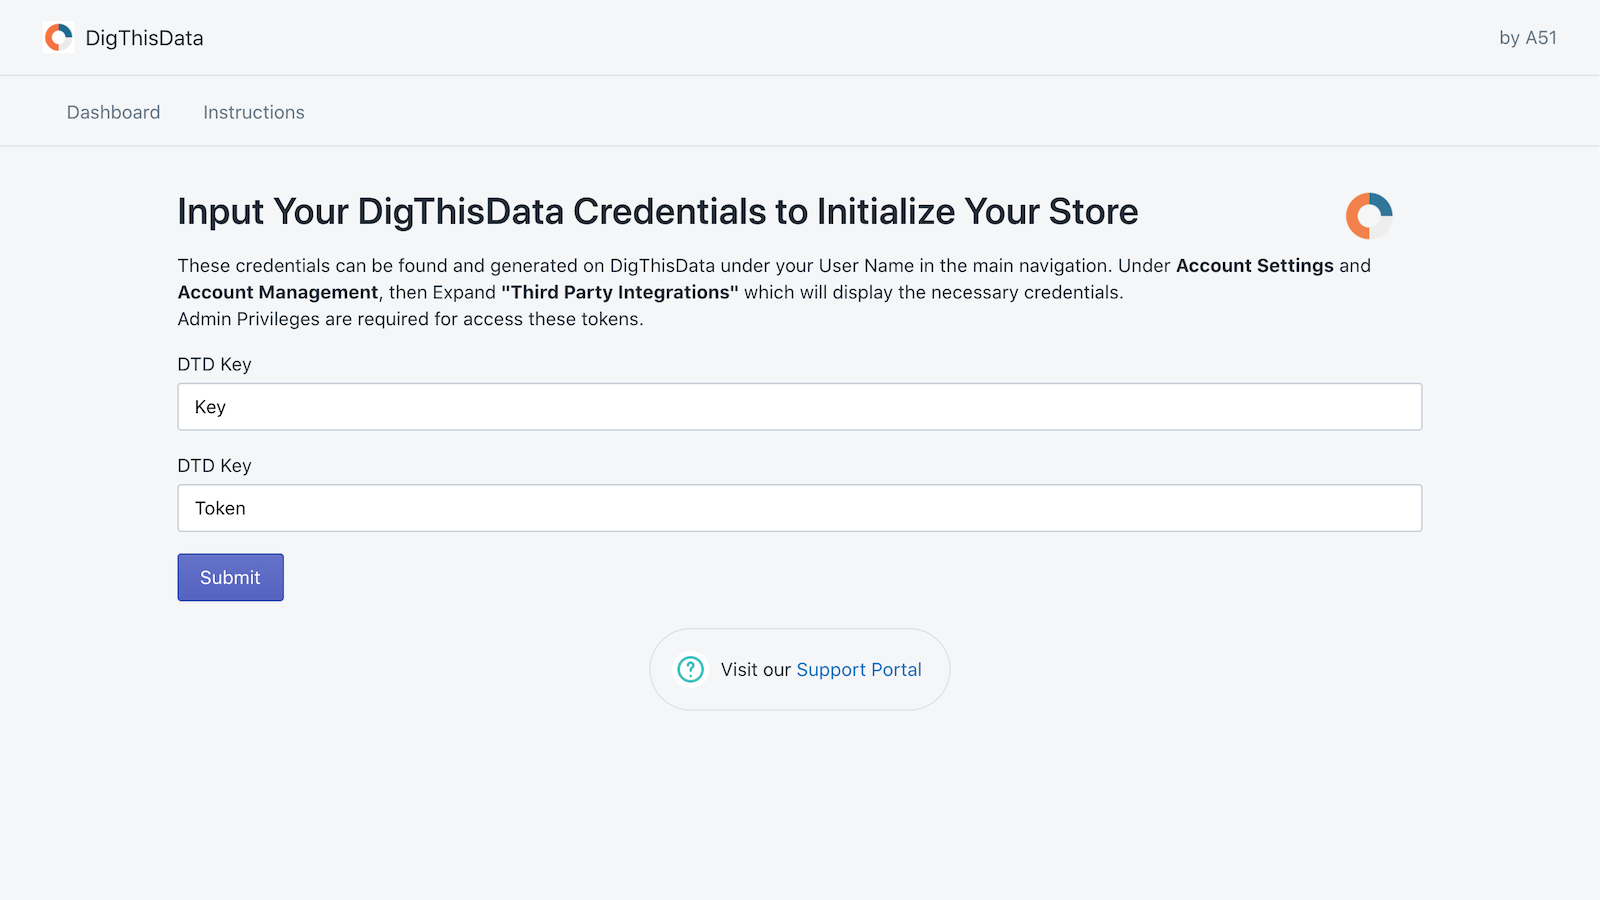 Registering your Store with your DigThisData account